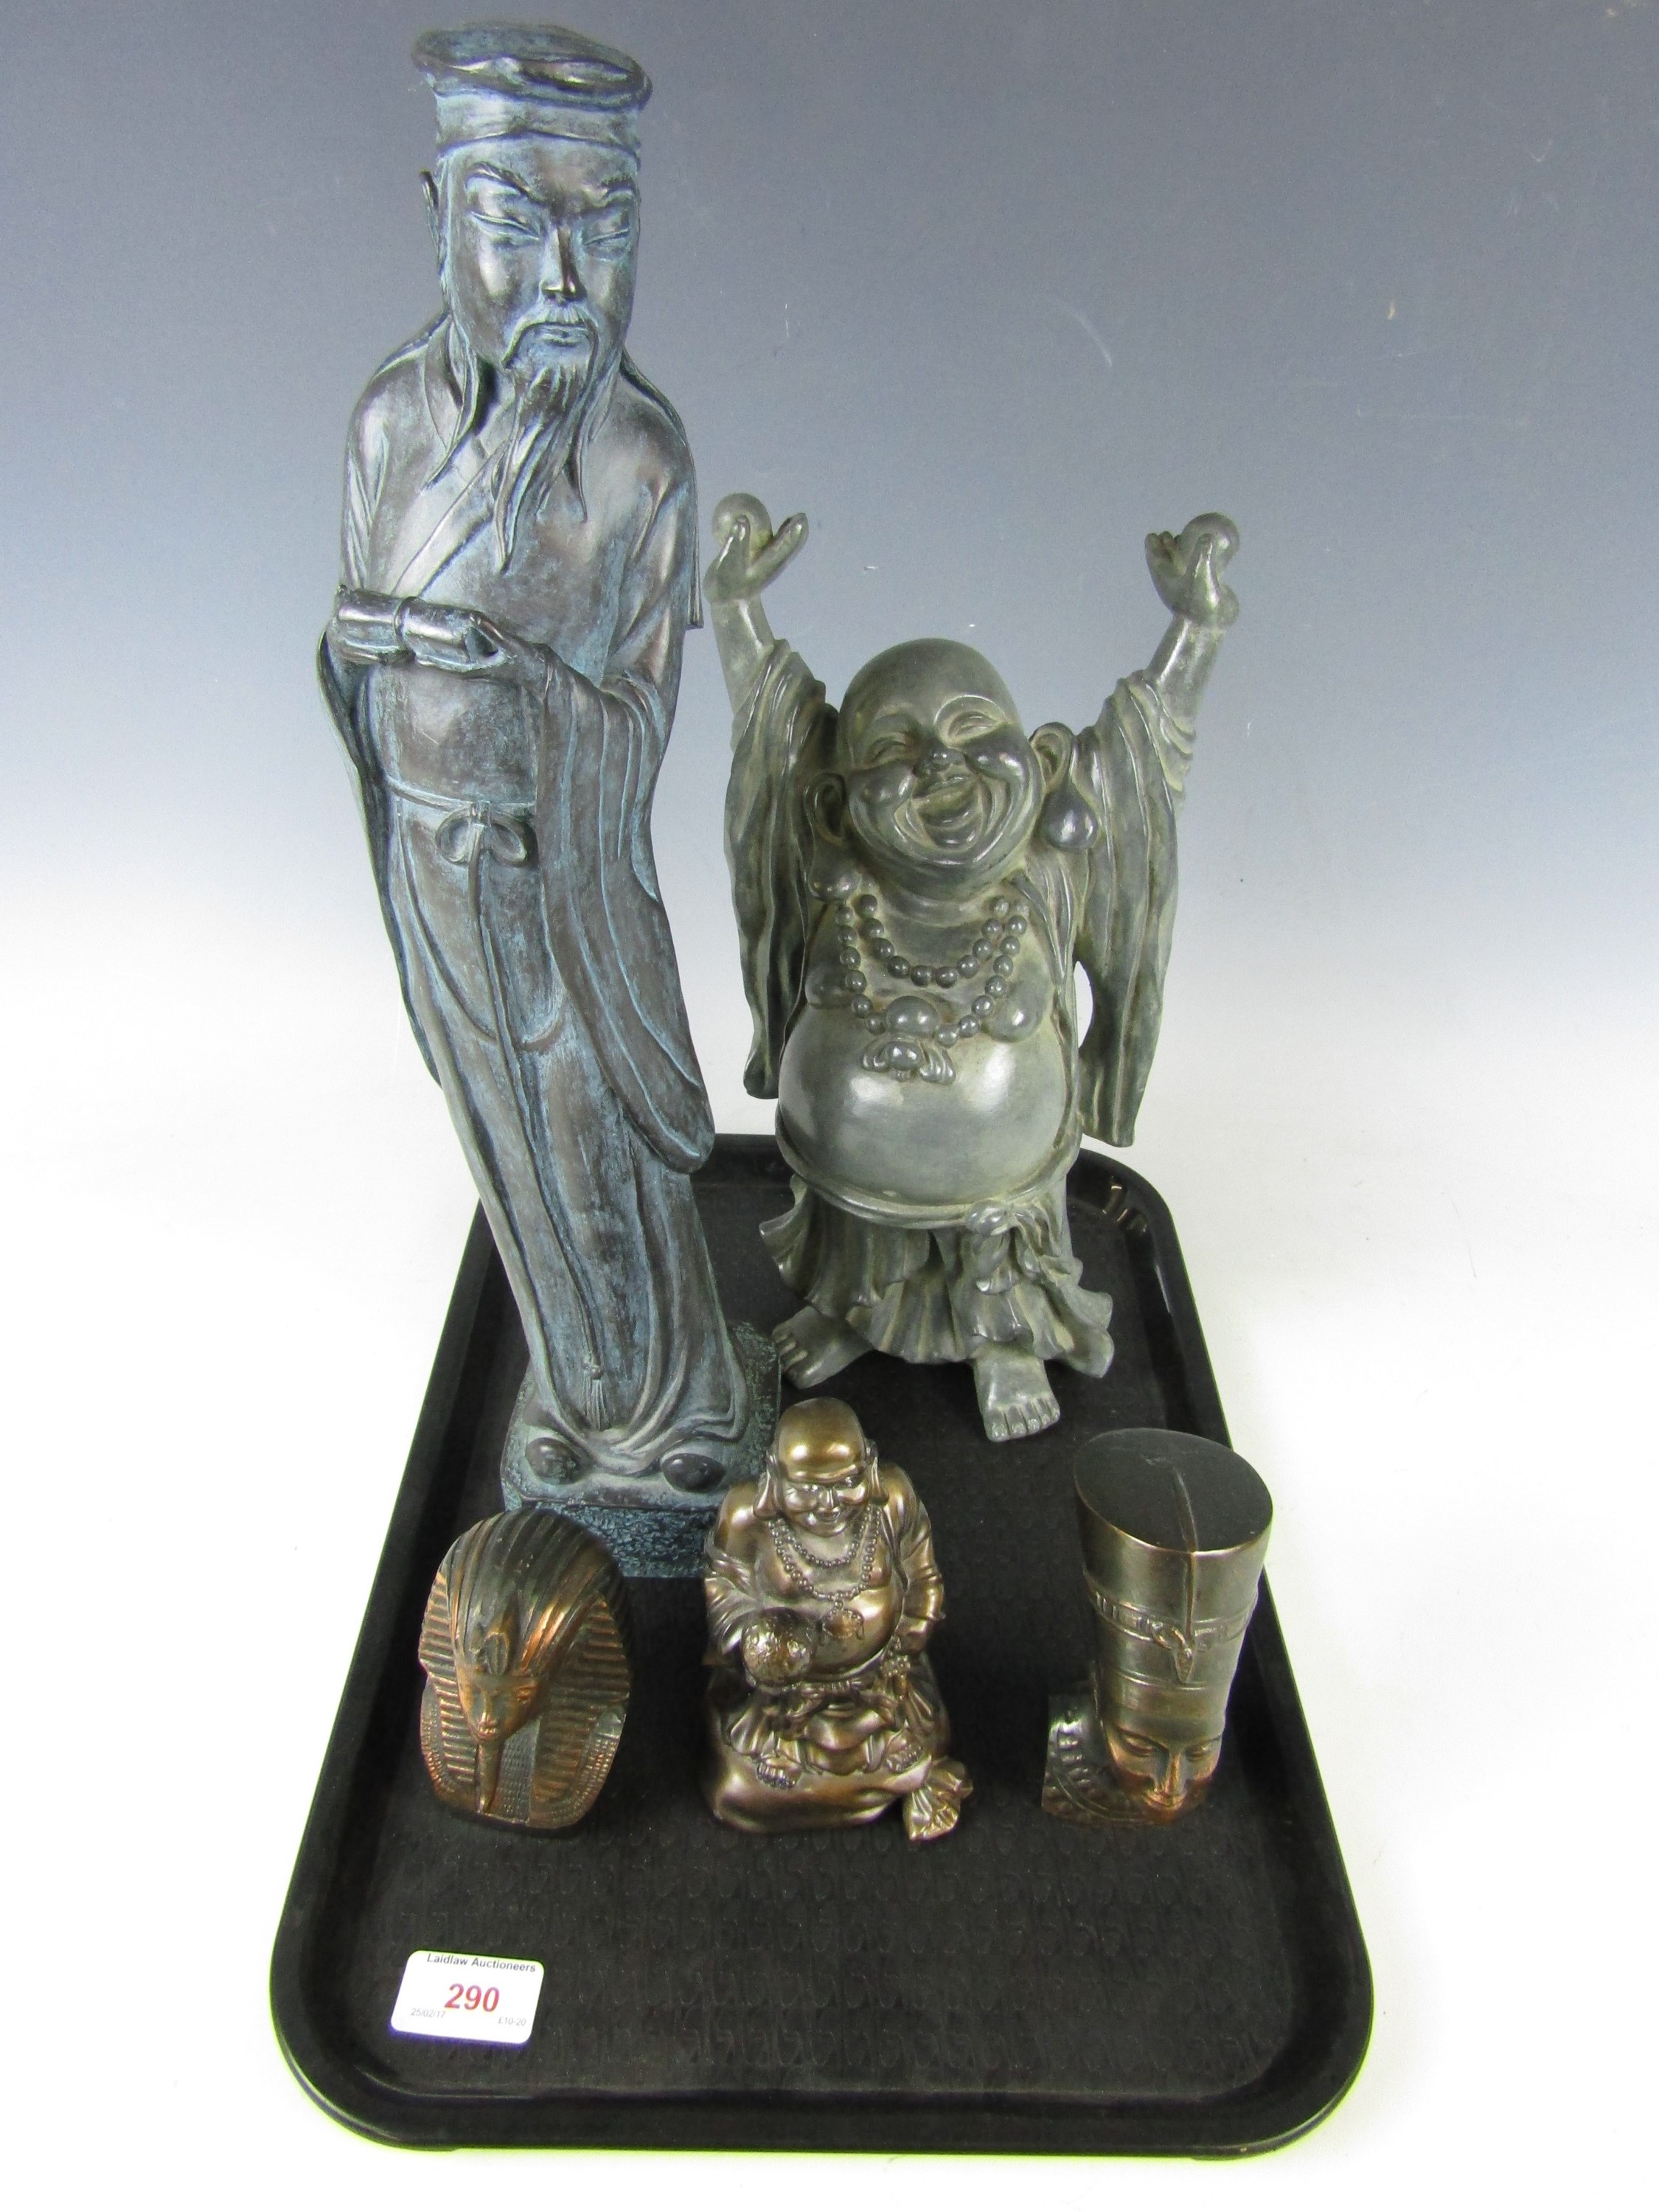 A cast figurine of a Chinese sage, together with two similar laughing Buddha figurines and two